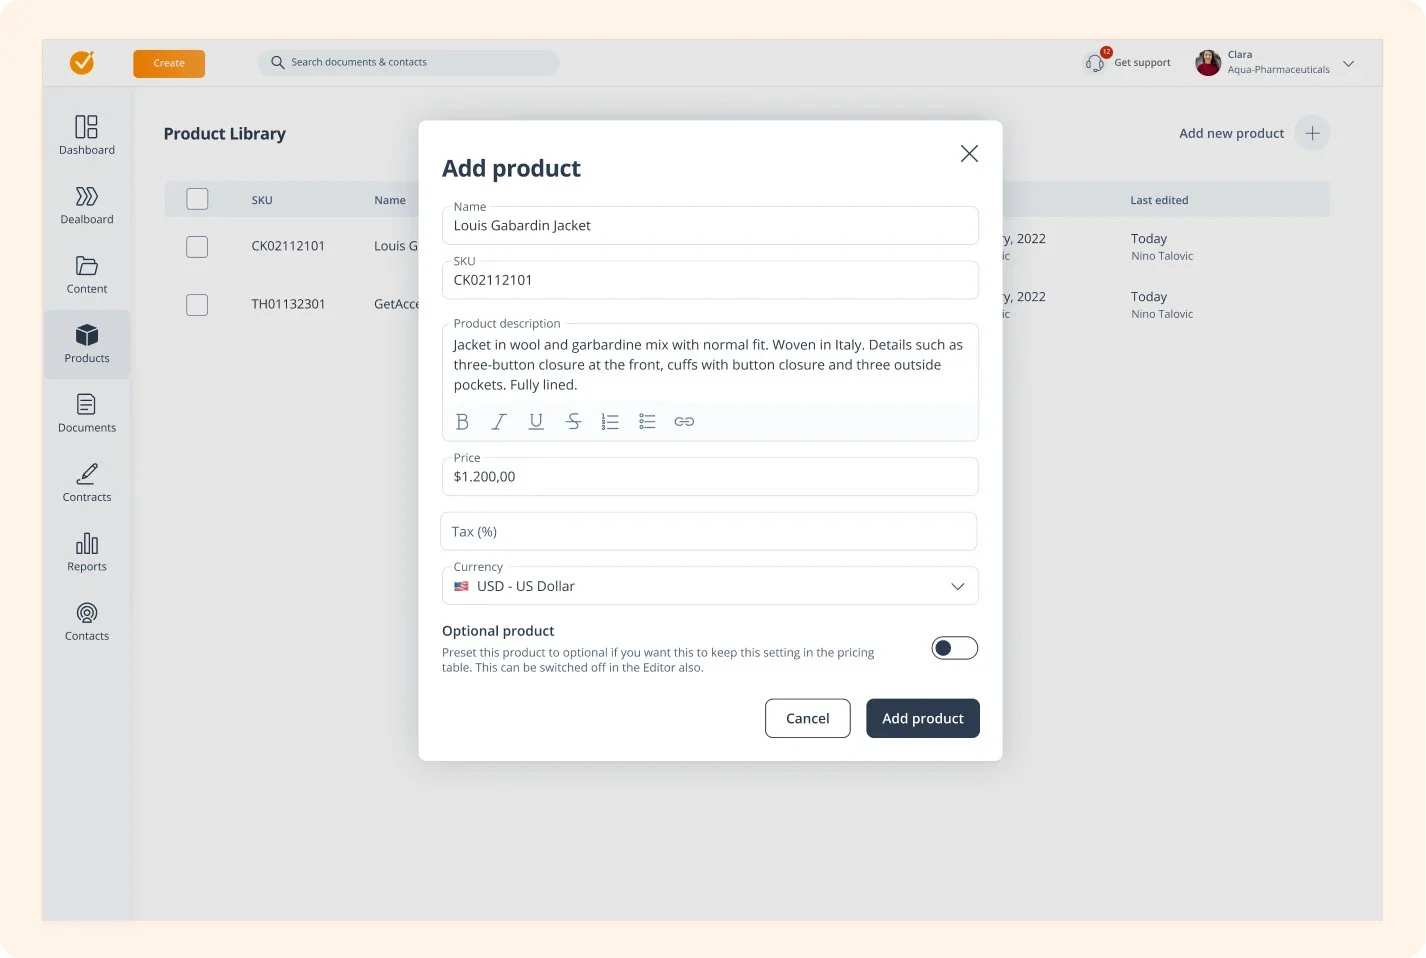 Create your product catalog in the product library in just a few clicks. Personalize each product with a name, SKU, description, price, and currency.